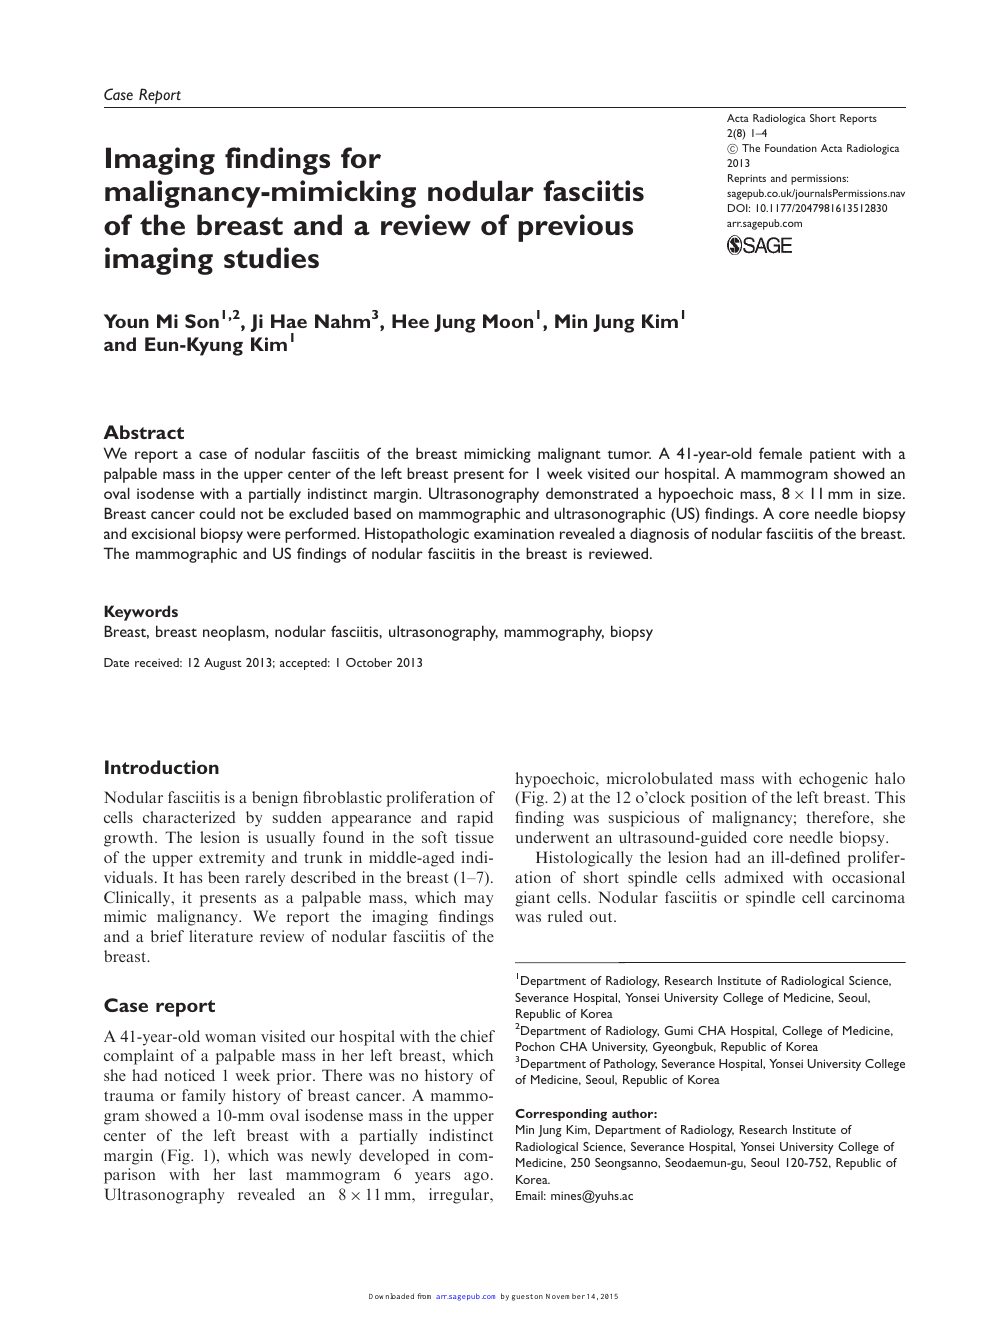 Imaging Findings For Malignancy Mimicking Nodular Fasciitis Of The Breast And A Review Of Previous Imaging Studies Topic Of Research Paper In Clinical Medicine Download Scholarly Article Pdf And Read For Free